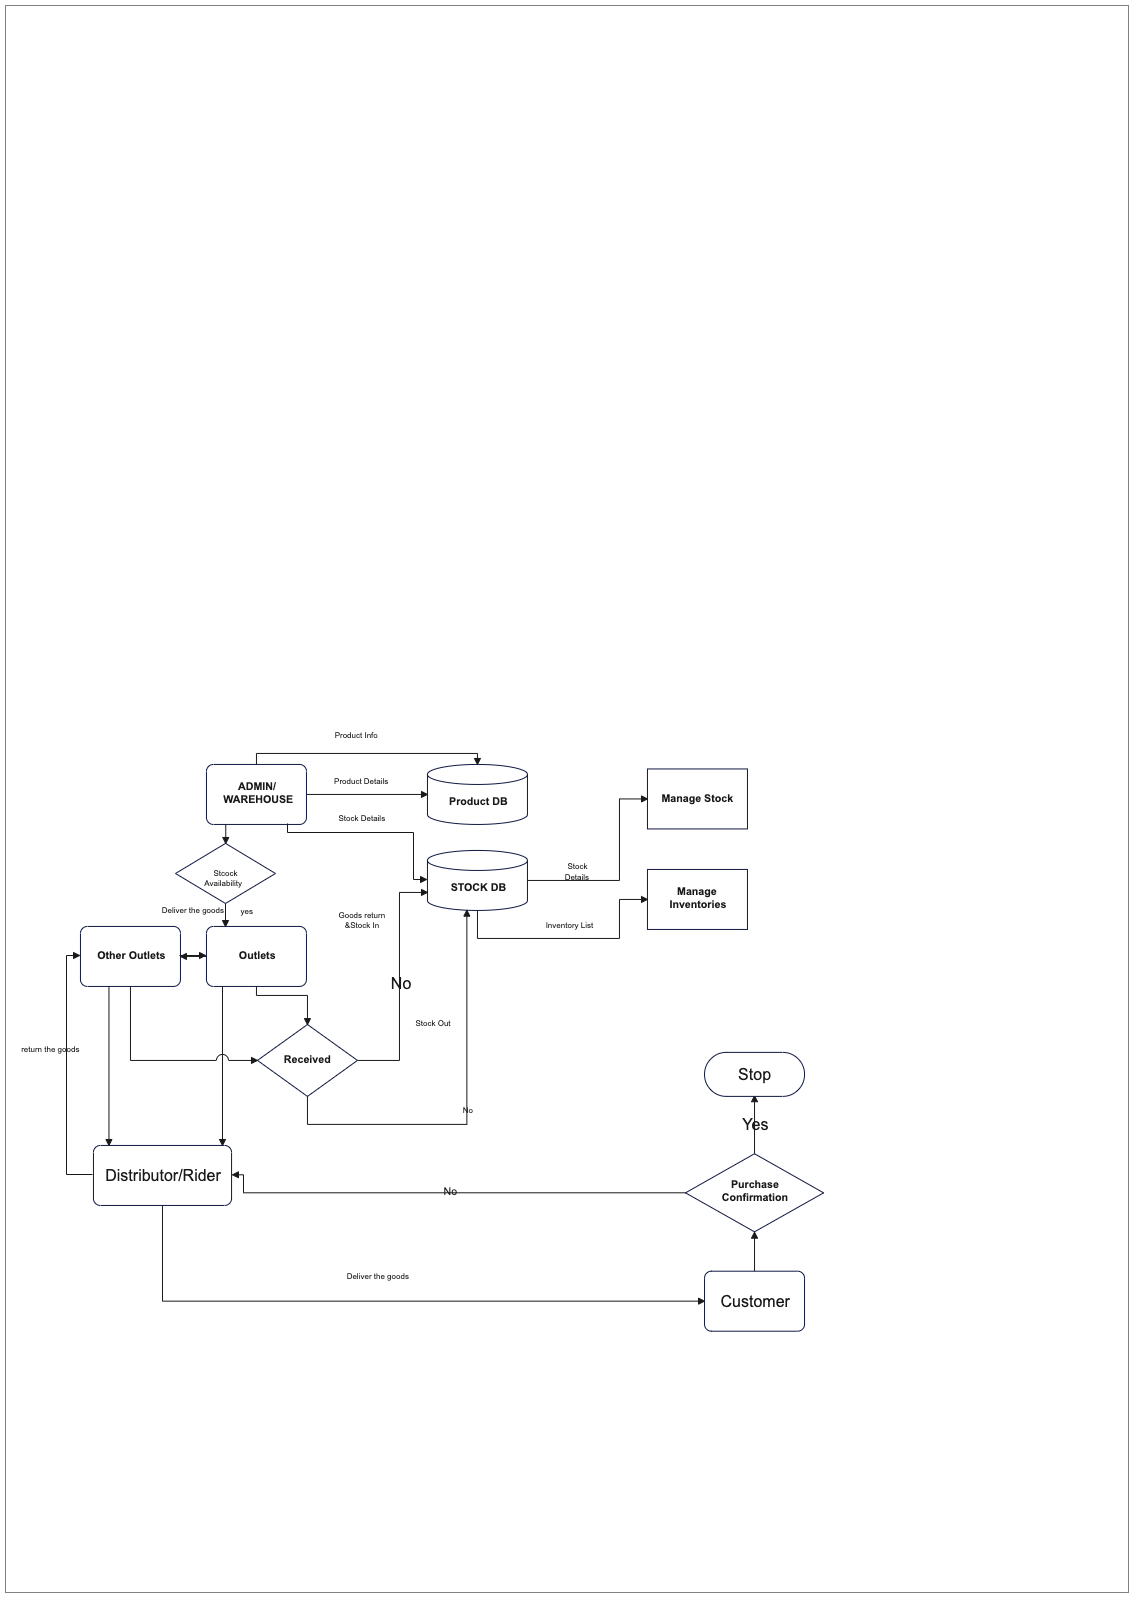 Database Flowchart to Track Inventory